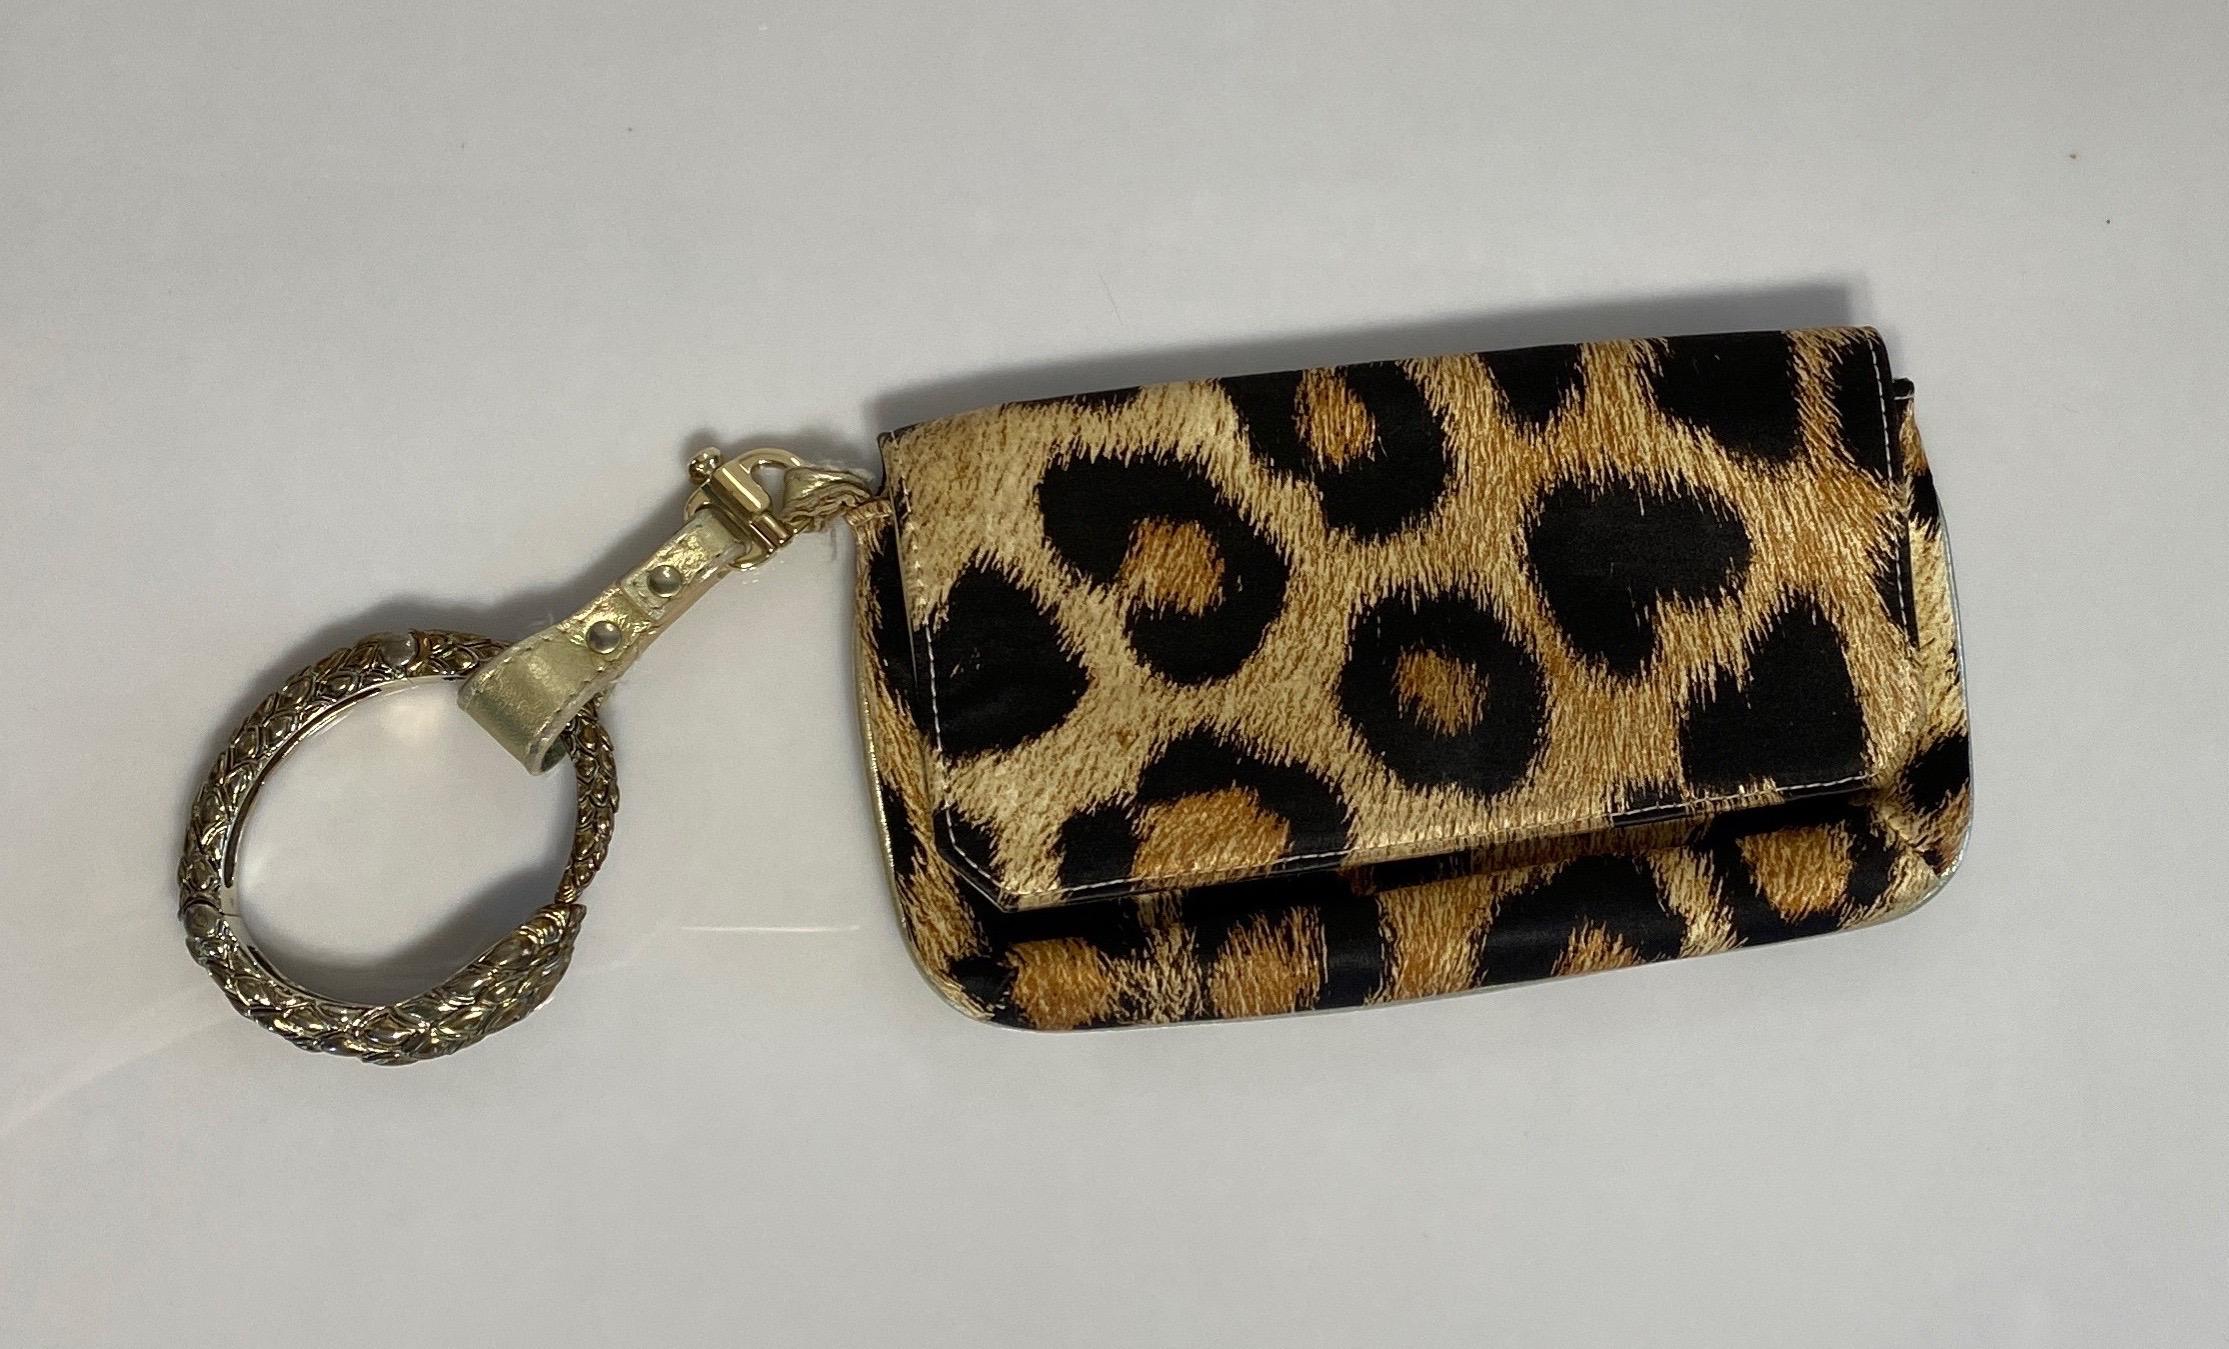 The Roberto Cavalli Leopard Silk Print Bracelet Bag is a gold and brown leopard silk print clutch bag with gold leather piping with a removable gold/bronze serpent bracelet as handle. The removable handle has a gold clasp, a gold leather strap that